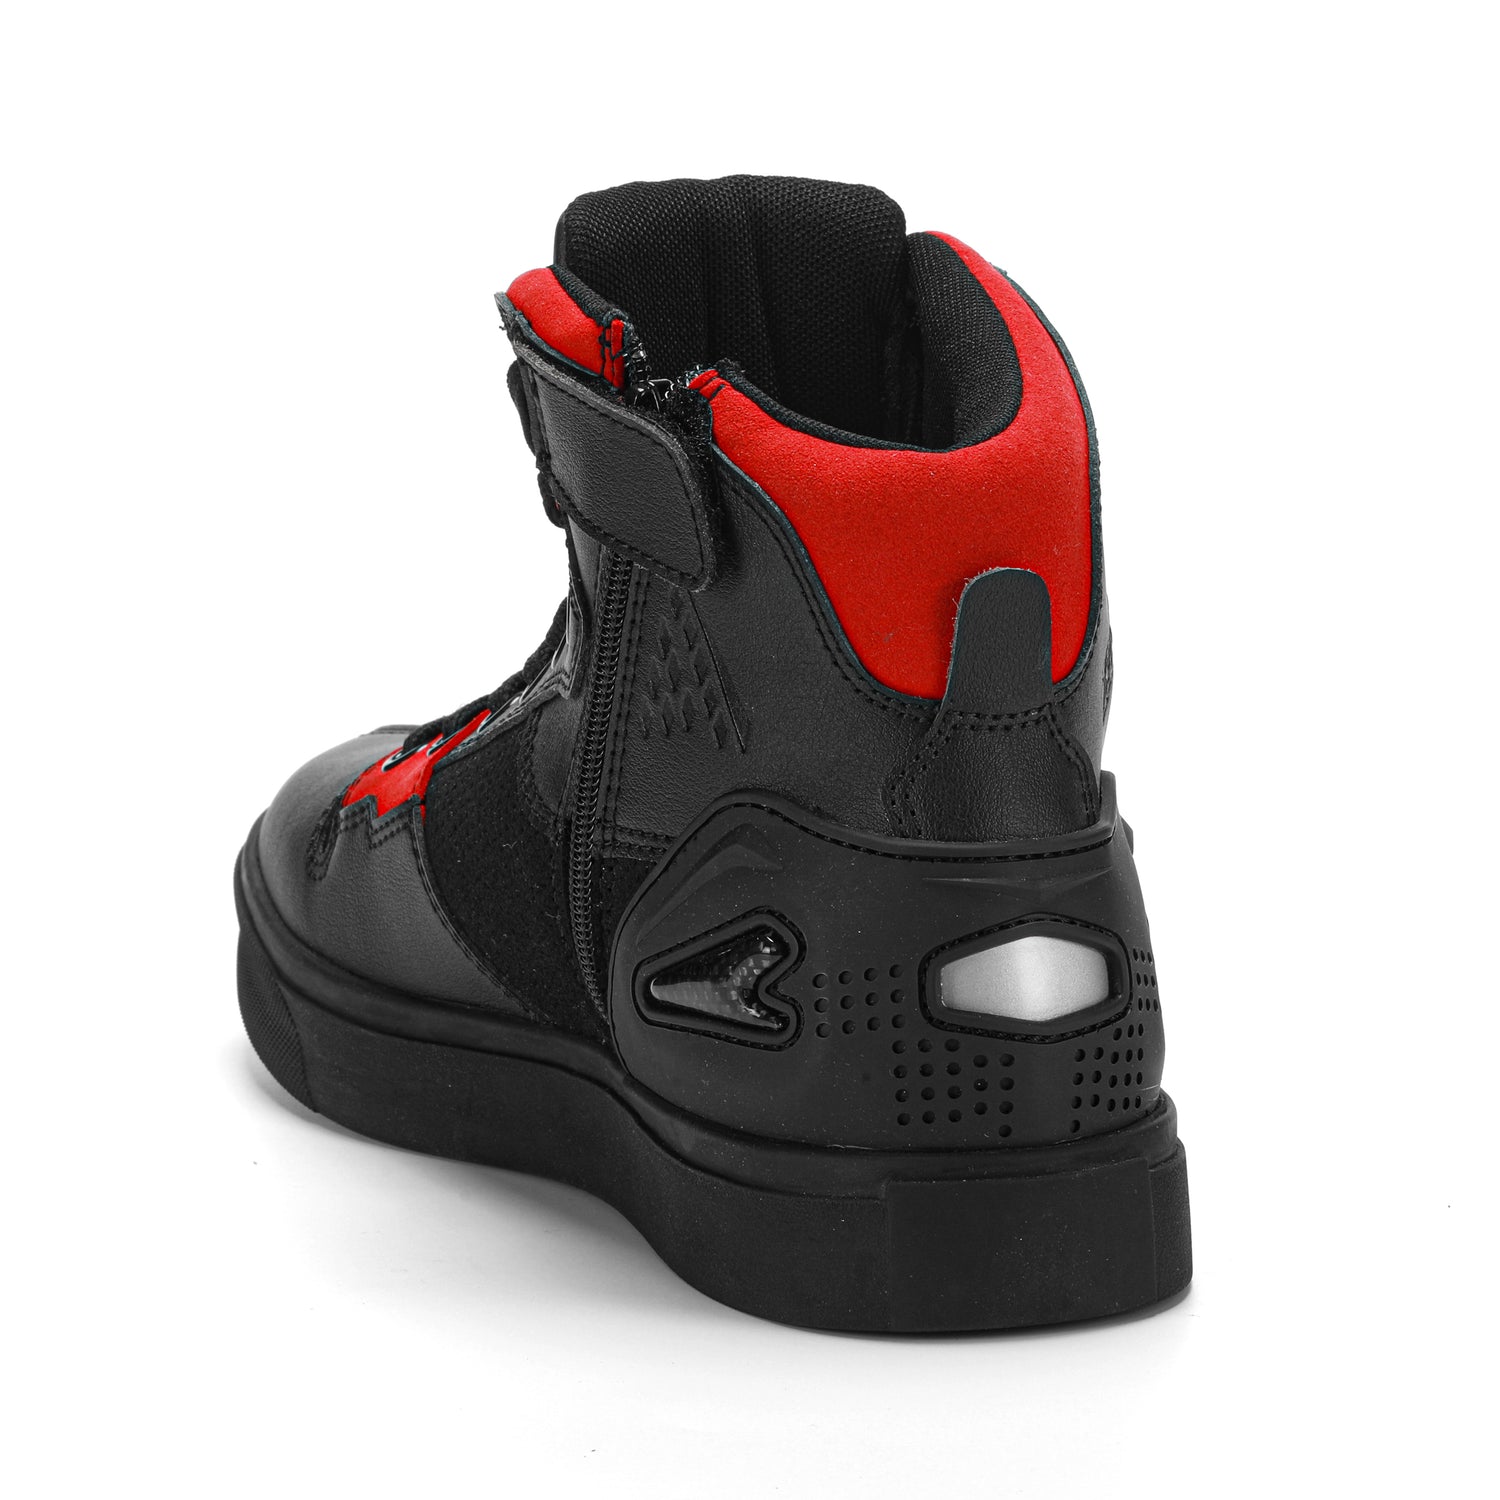 Rubber Sole Confortable Protective Motorcycle Shoes